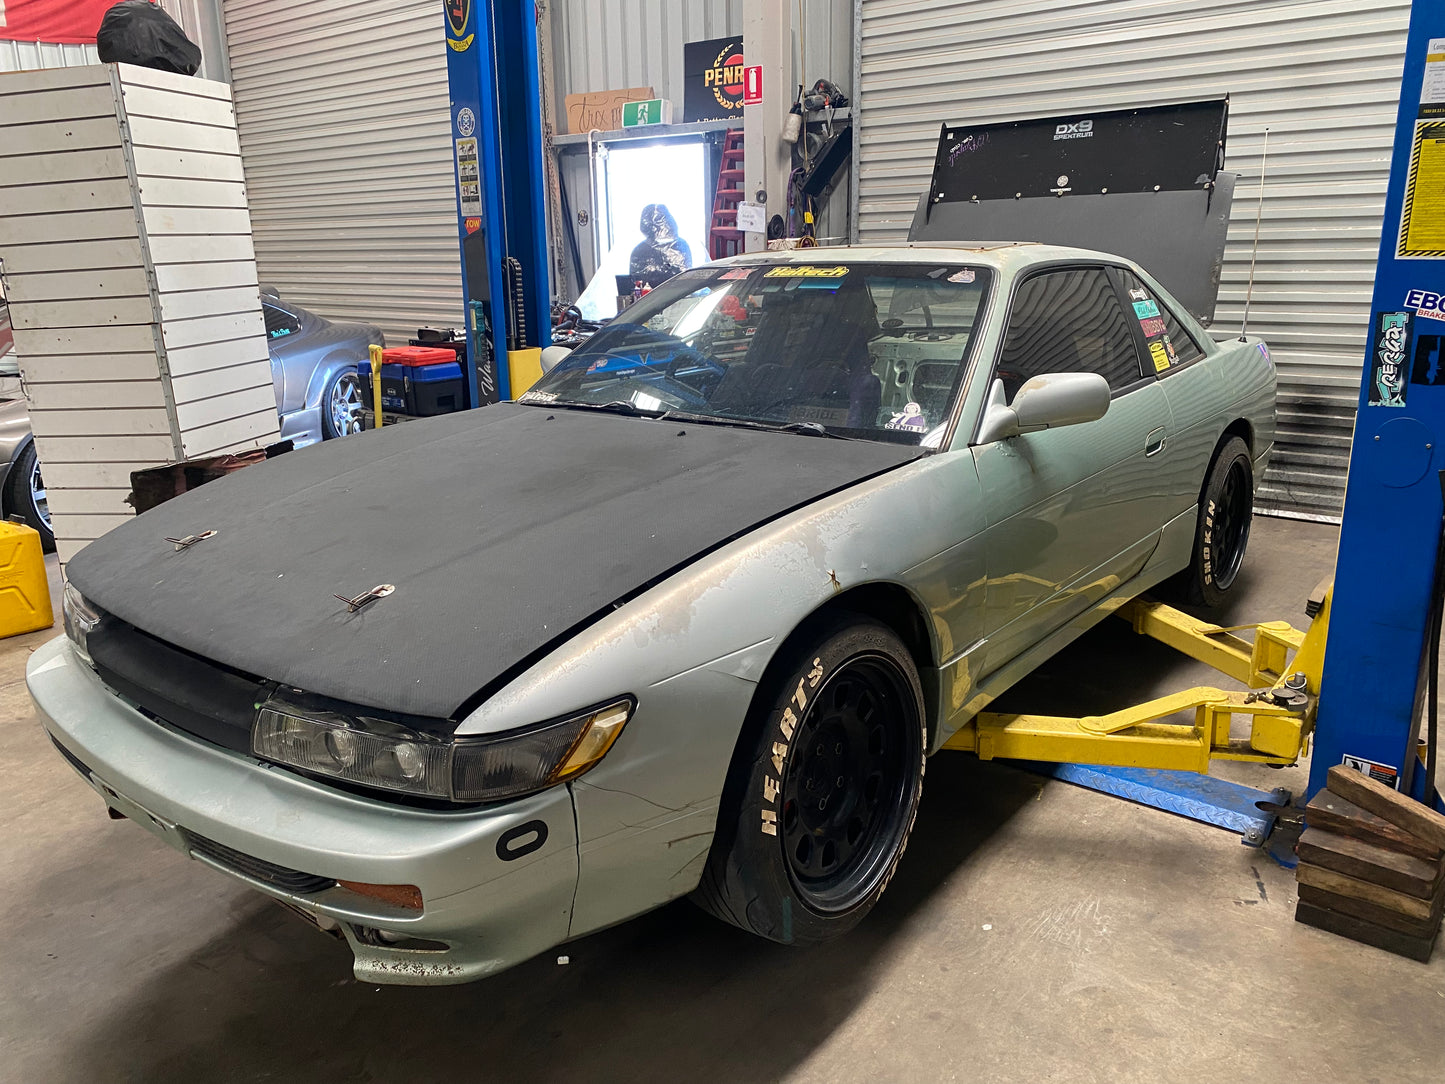 RB20 swapped S13 part out